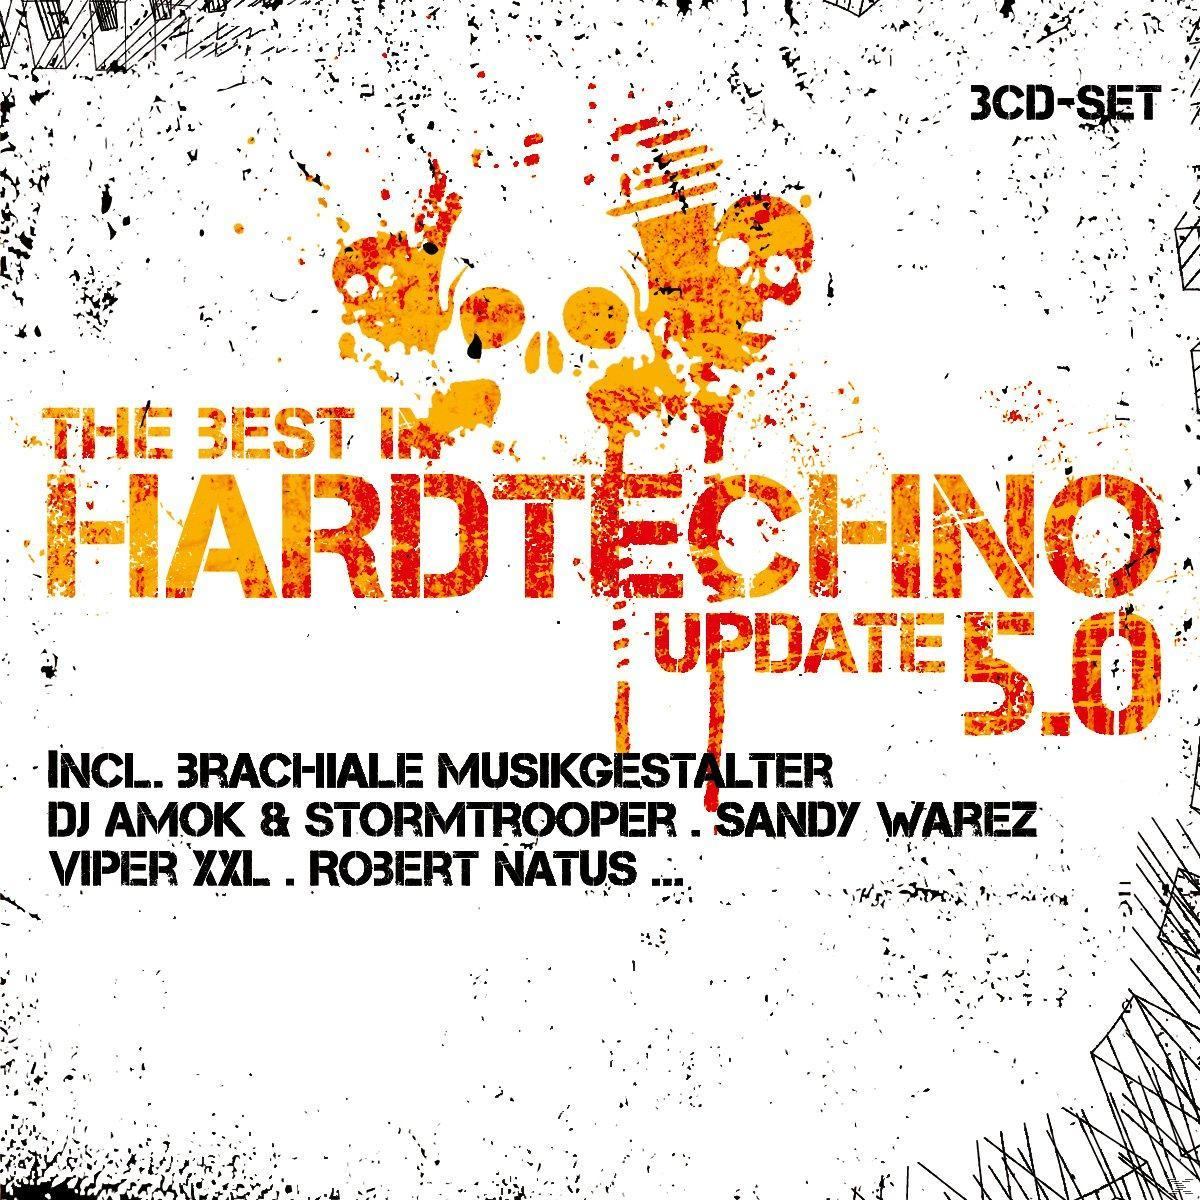 VARIOUS Best Hardtechno - In The 5.0 Update - (CD)